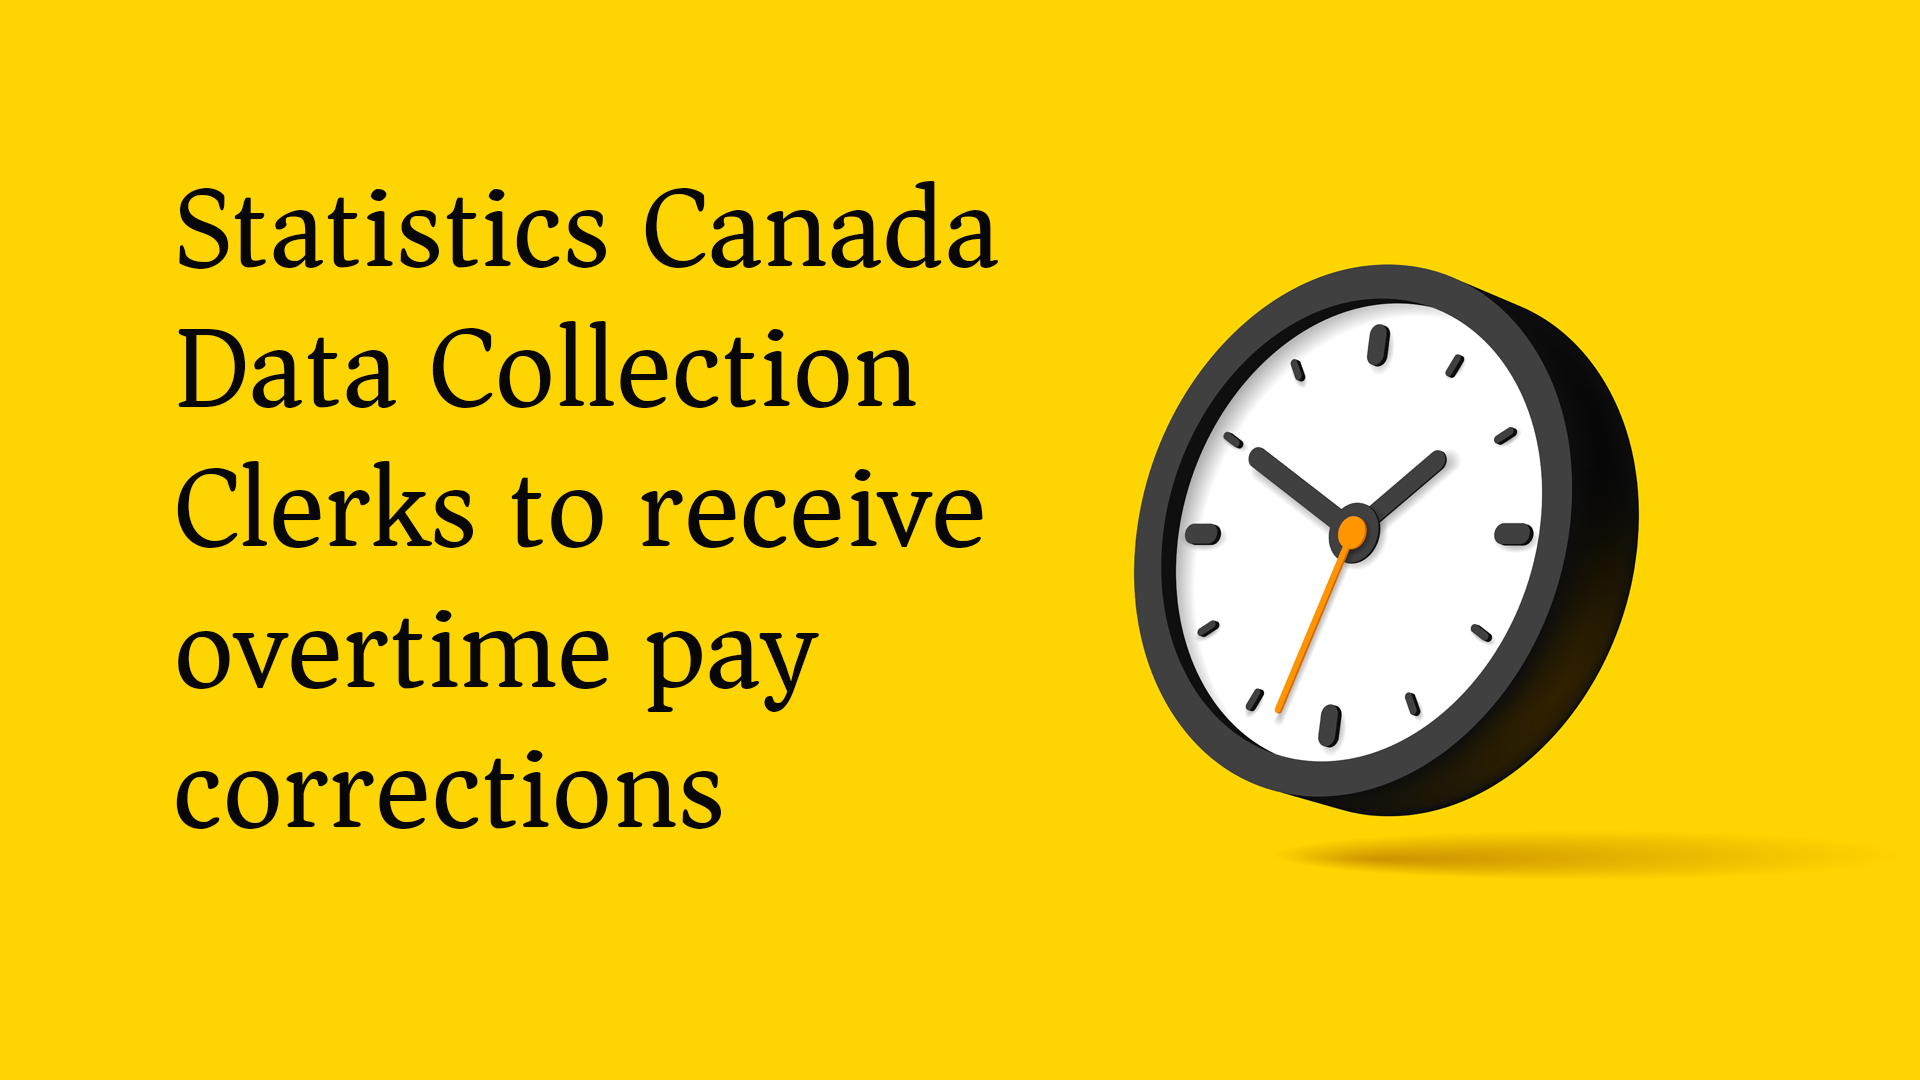 Statistics Canada Data Collection Clerks (DCC) to receive overtime pay corrections